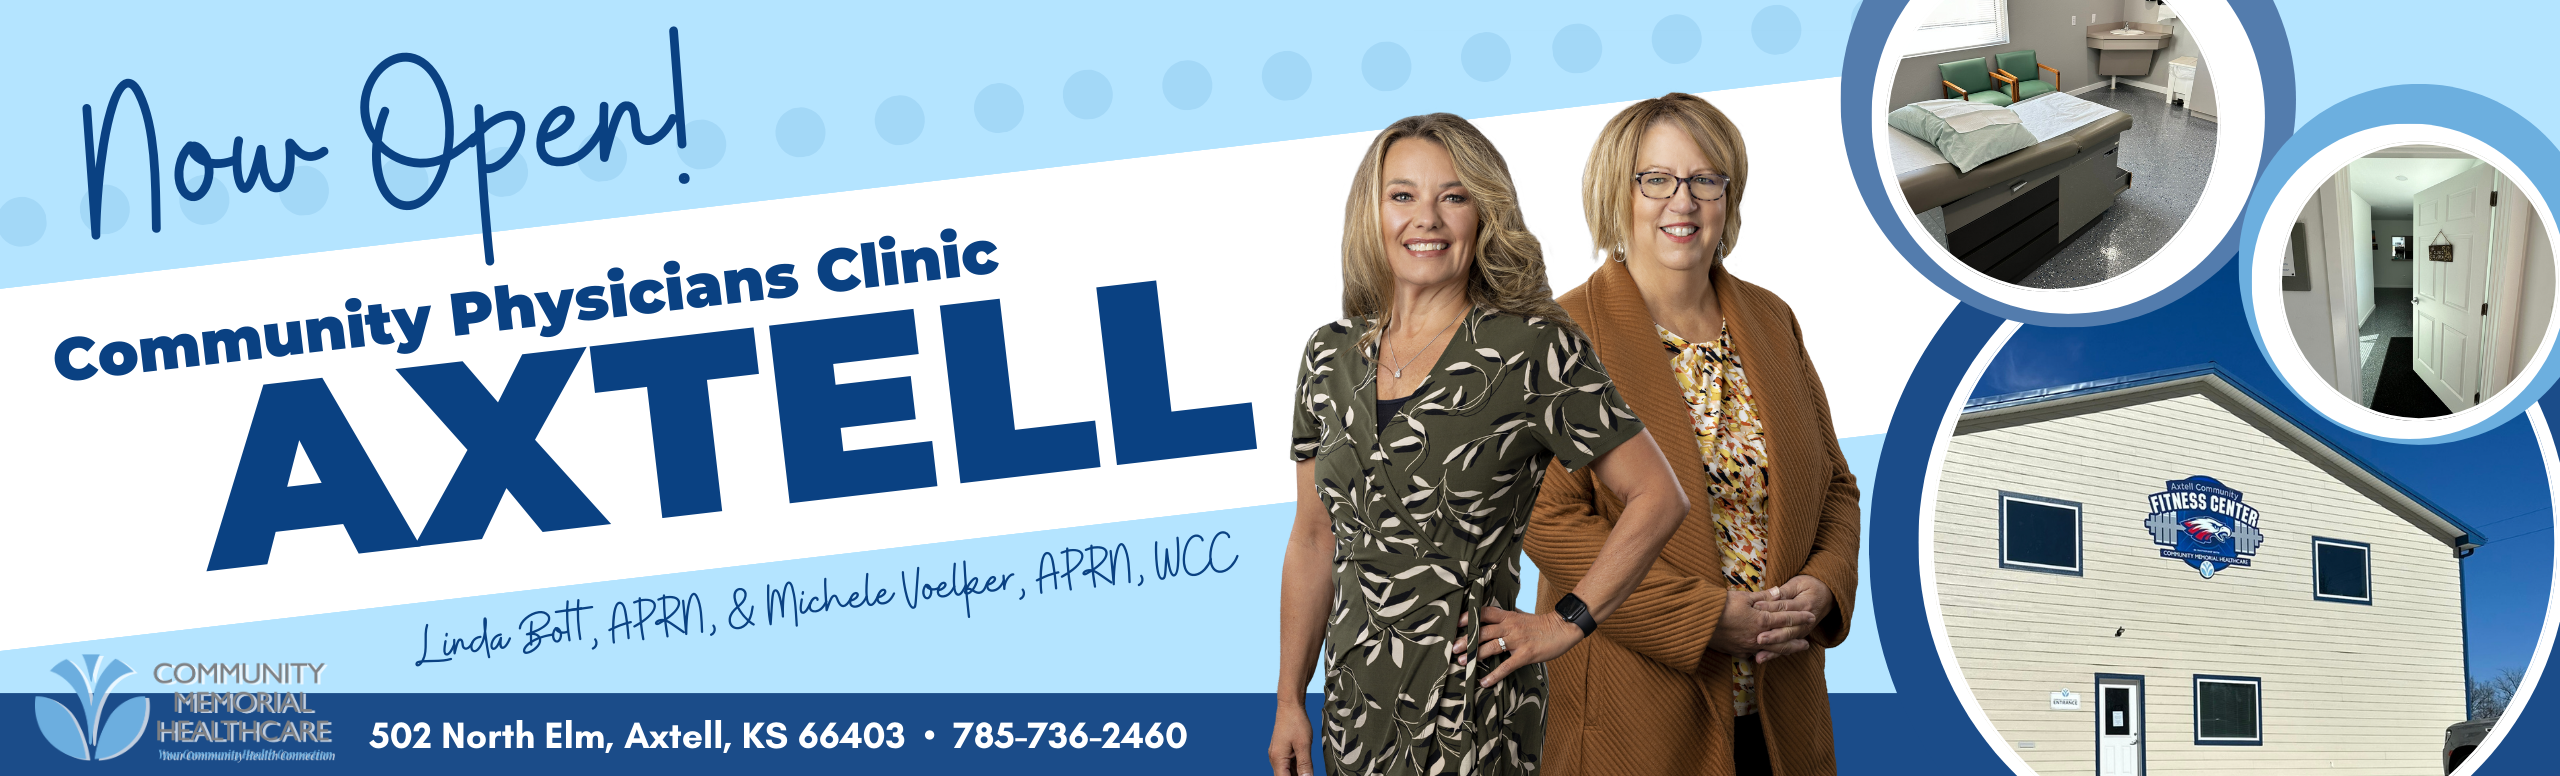 Community Physicians Clinic Axtell is Now Open and accepting new patients.
Linda Bott, APRN
Michele Voelper, APRN WCC

502 North Elm
Axtell, KS 66403
785-736-2460

Community Memorial Healthcare